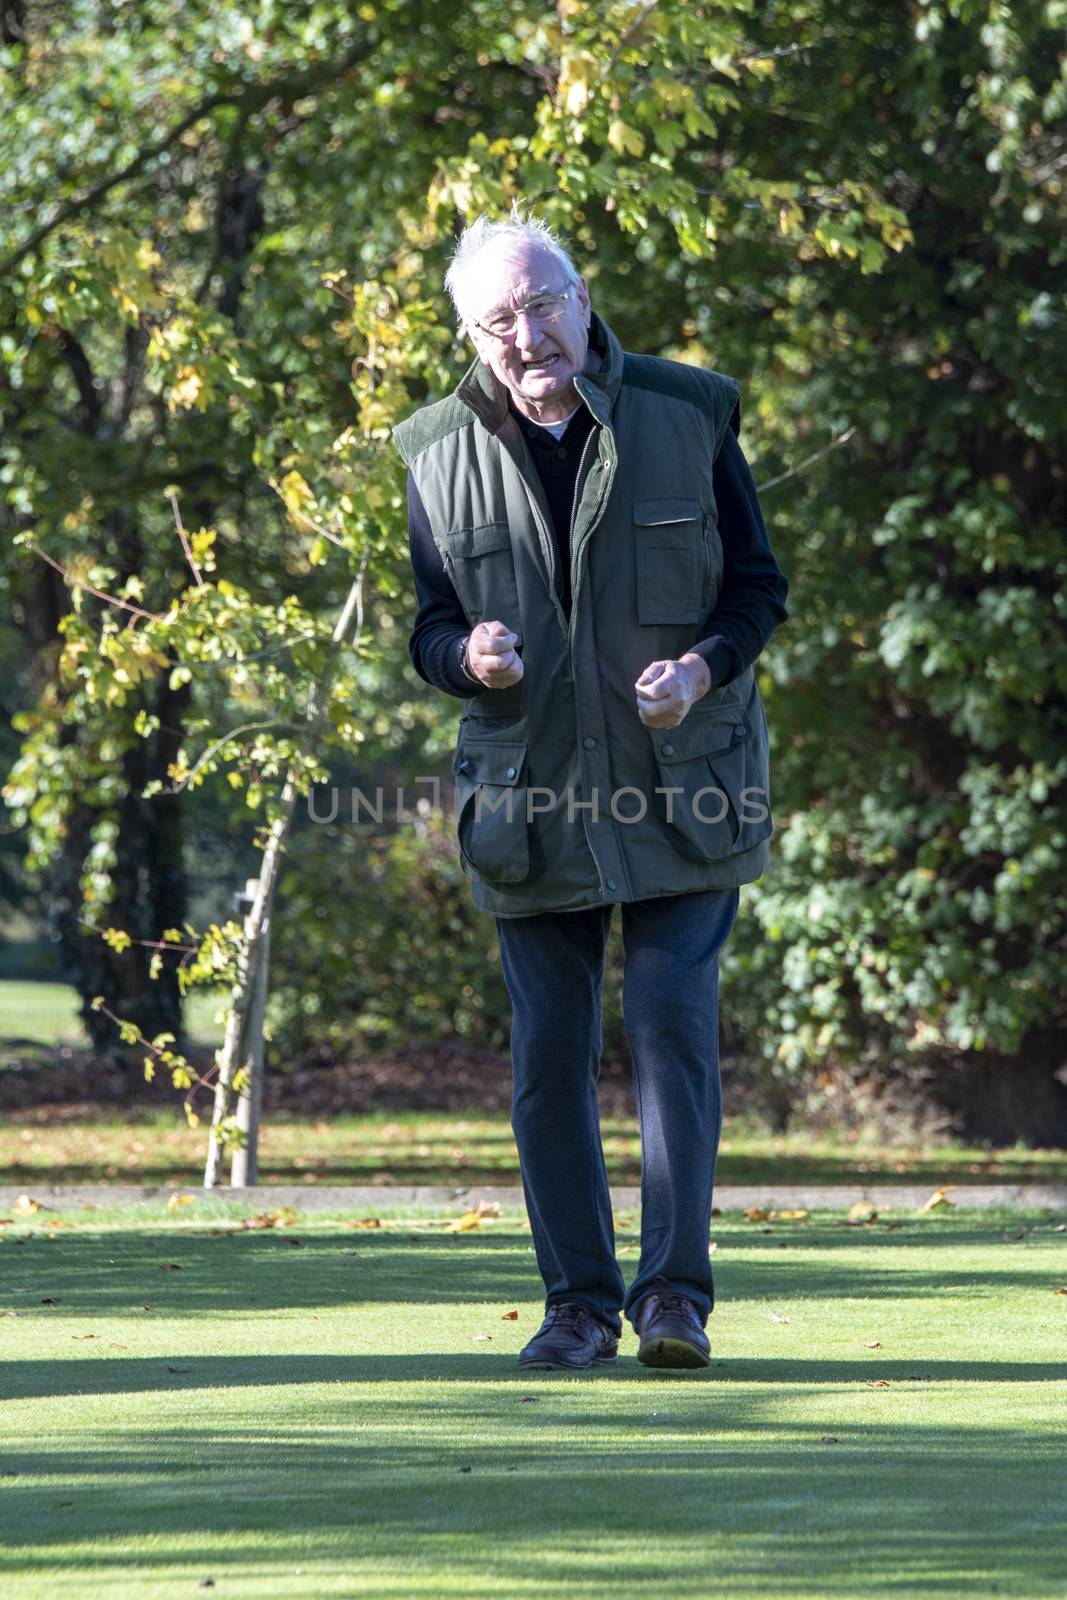 UK, Cheshire - Oct 2018: Elderly man standing outside in pain or angry